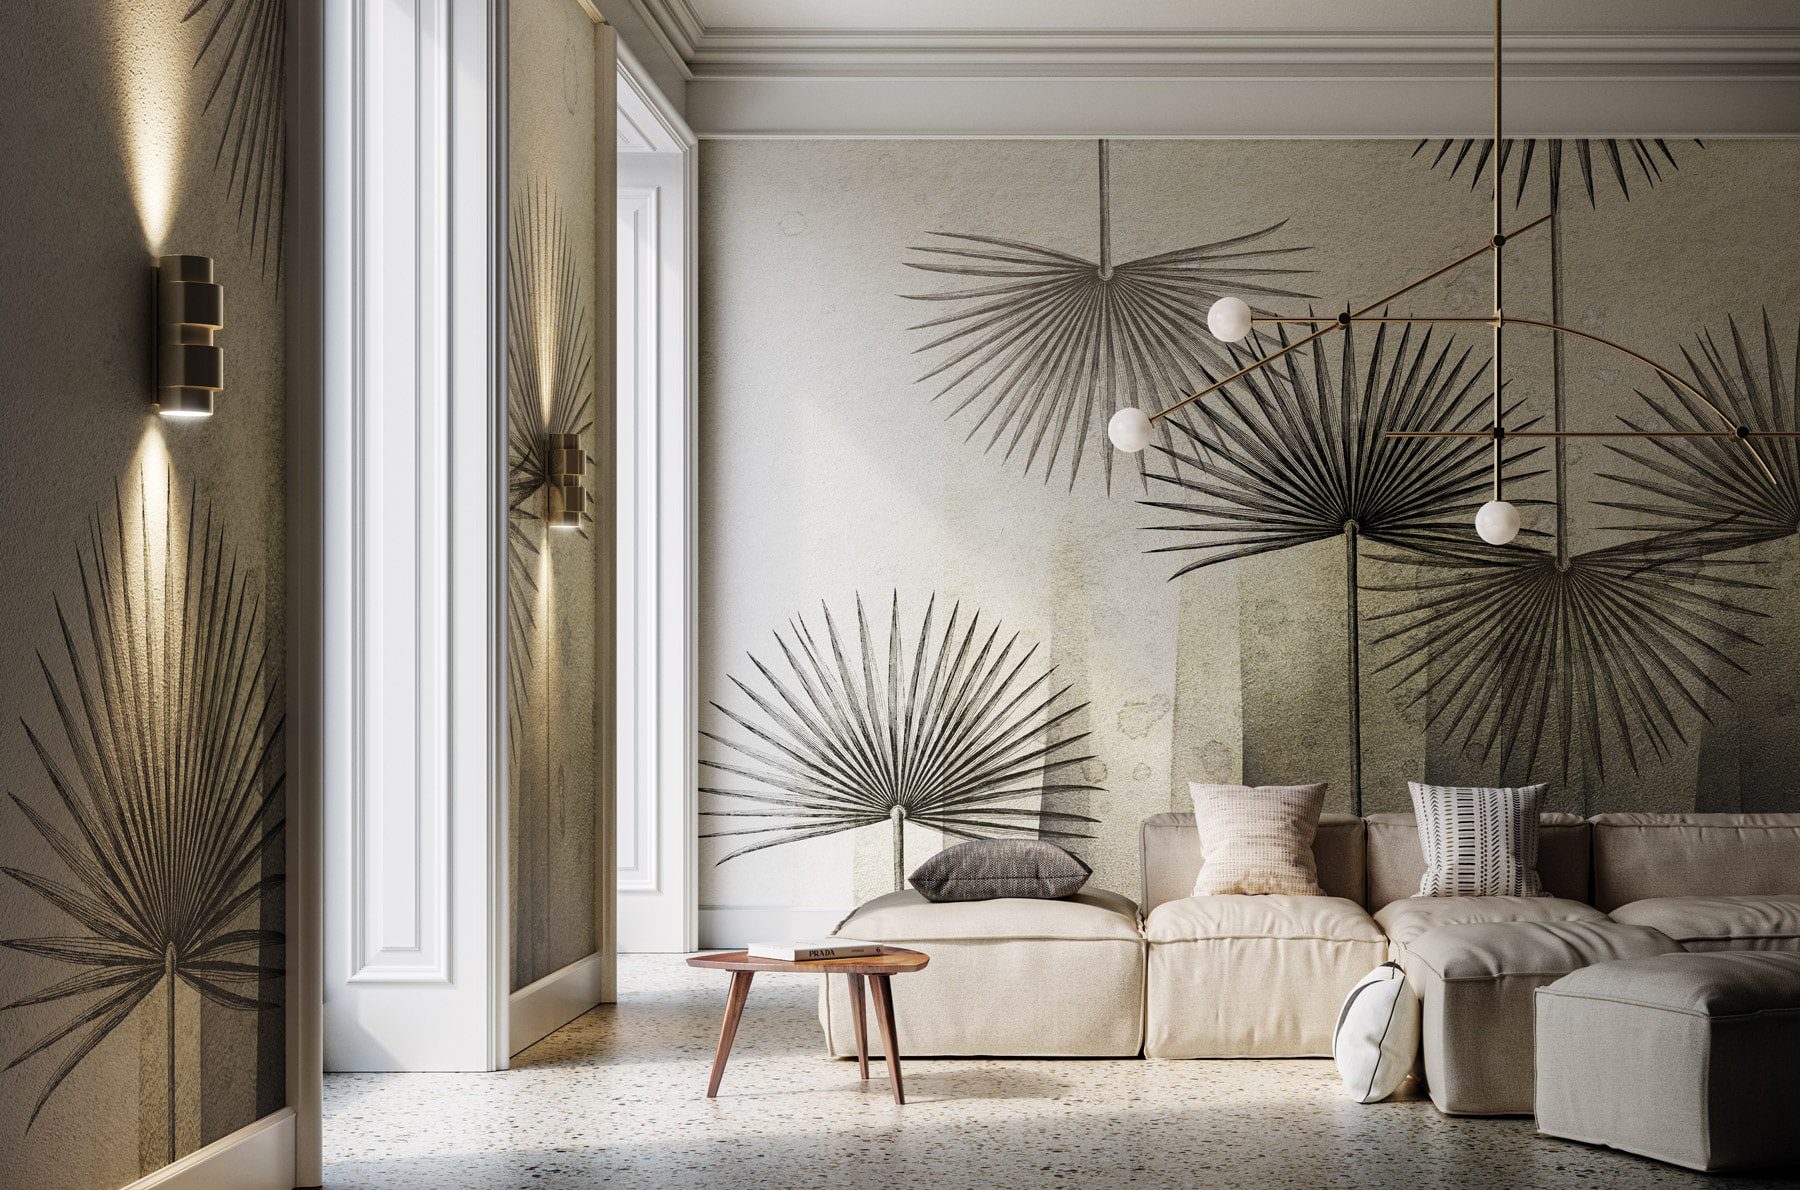 Renew your spaces with Instabilelab's Modern Living Room Wallpaper. Discover elegant, refined, and designer solutions.